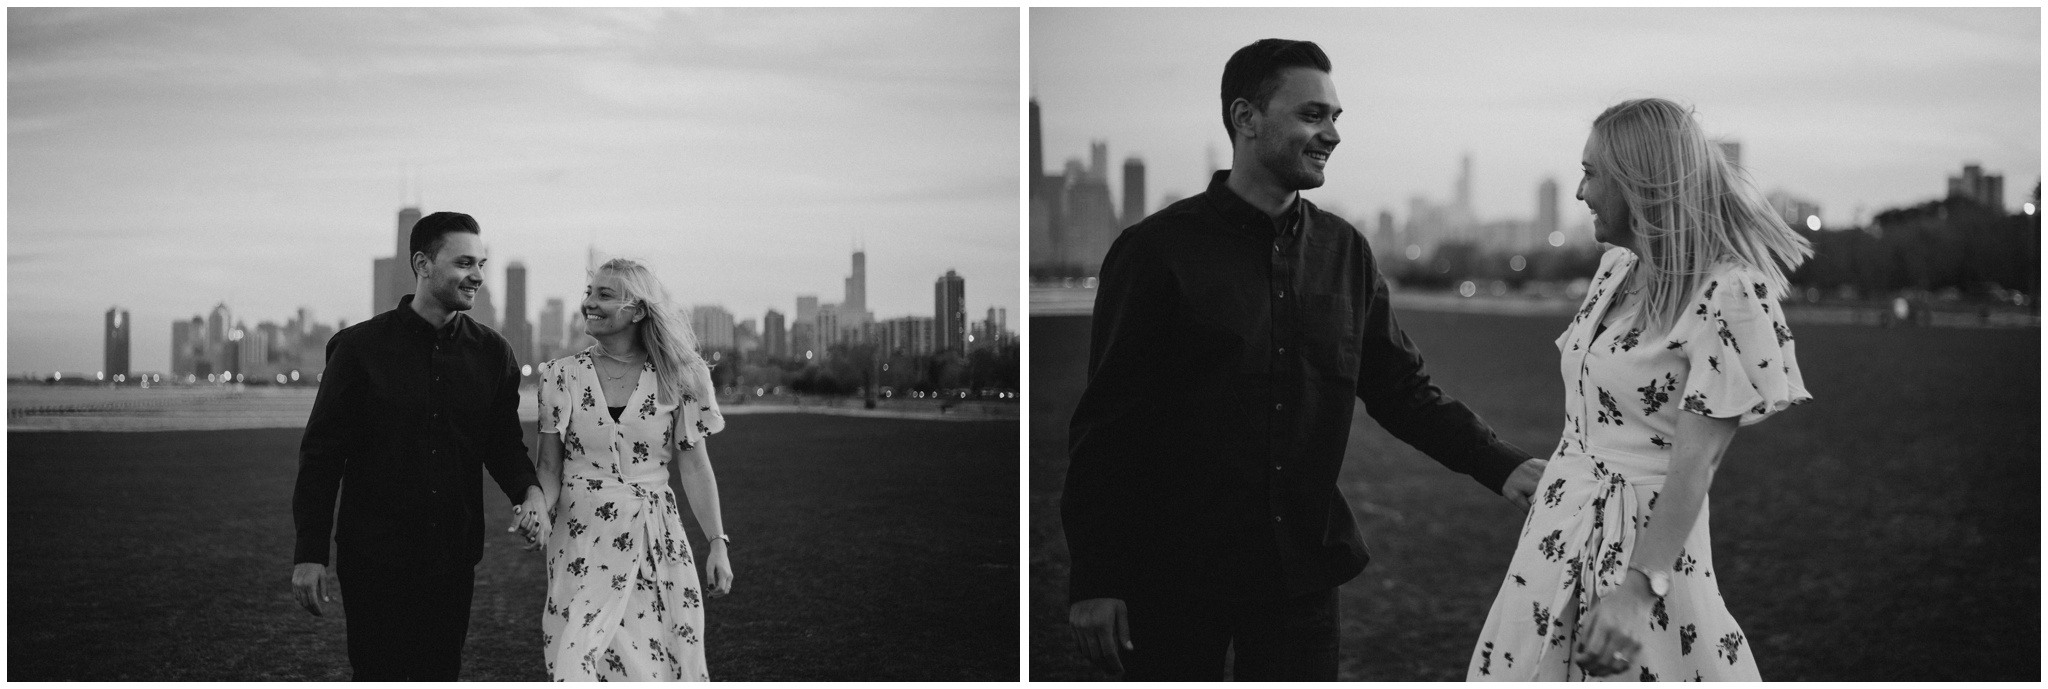 The Morros Wedding Photography Melissa and Anil Downtown Chicago Engagement Session_0470.jpg